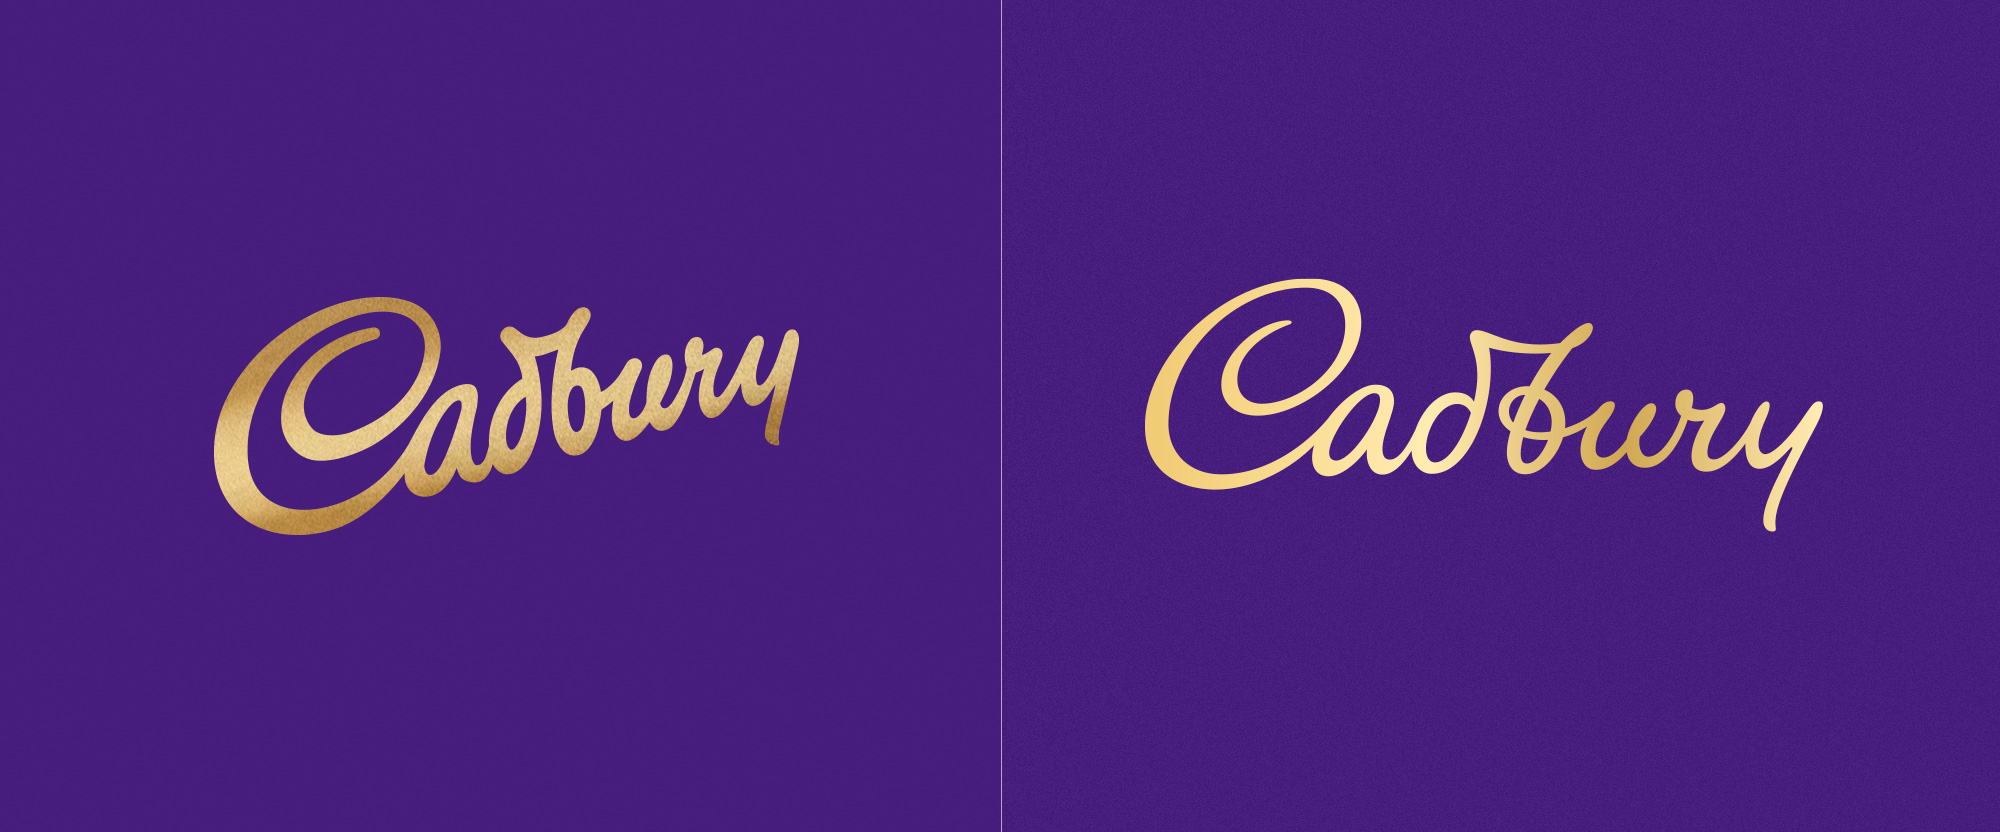 Brand New: New Name, Logo, and Identity for Tapestry by Carbone Smolan  Agency